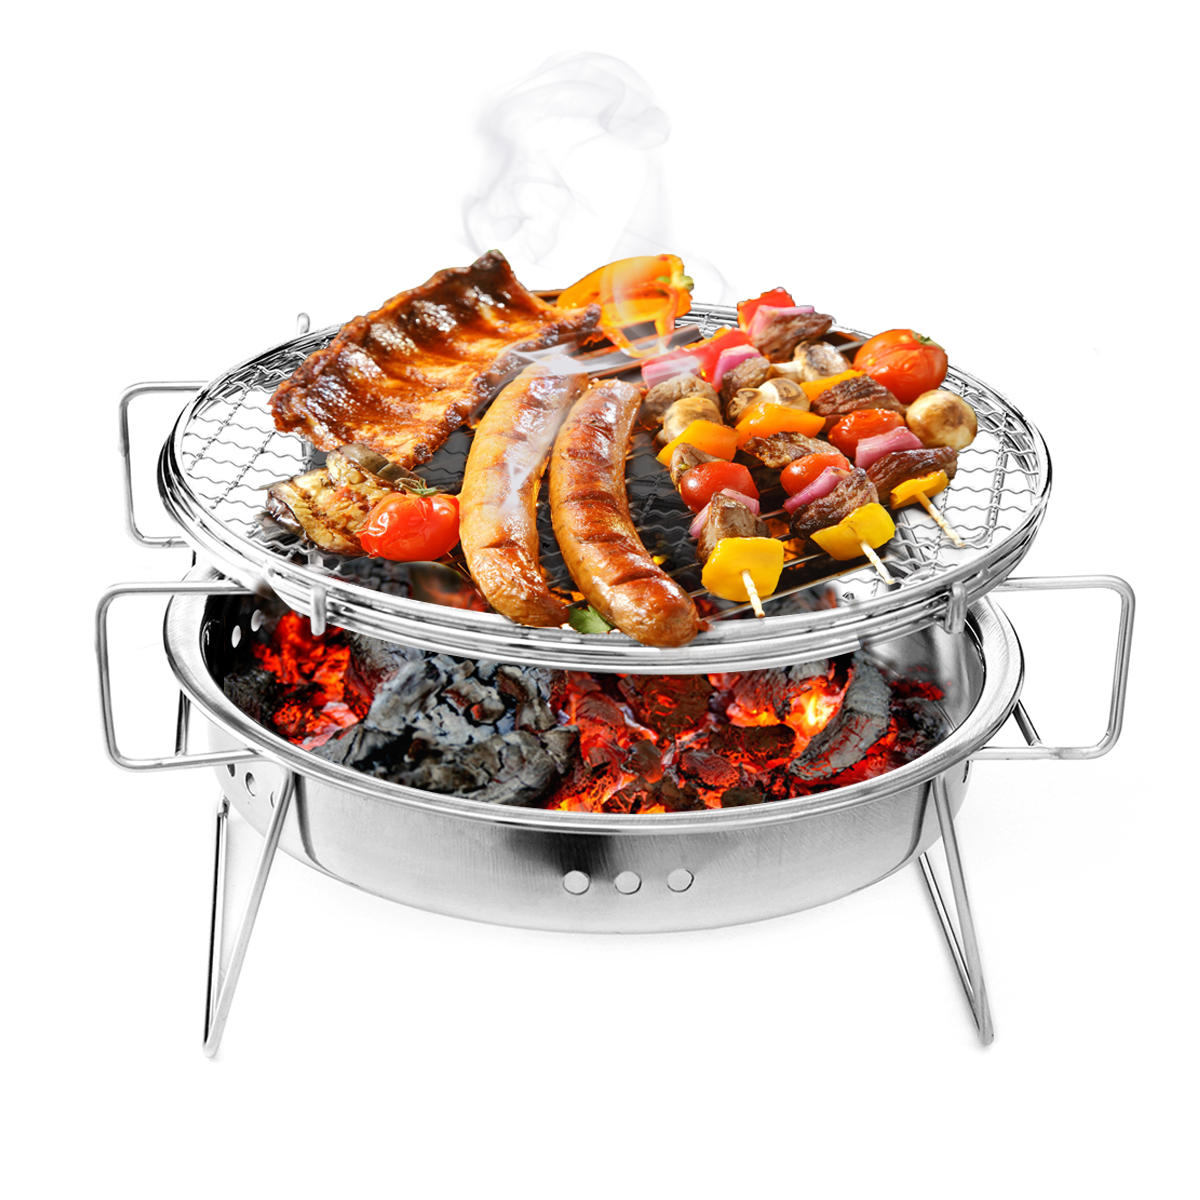 Portable Folding Barbecue BBQ Charcoal Grill Stainless Steel Patio Camping Picnic Cooking Stove